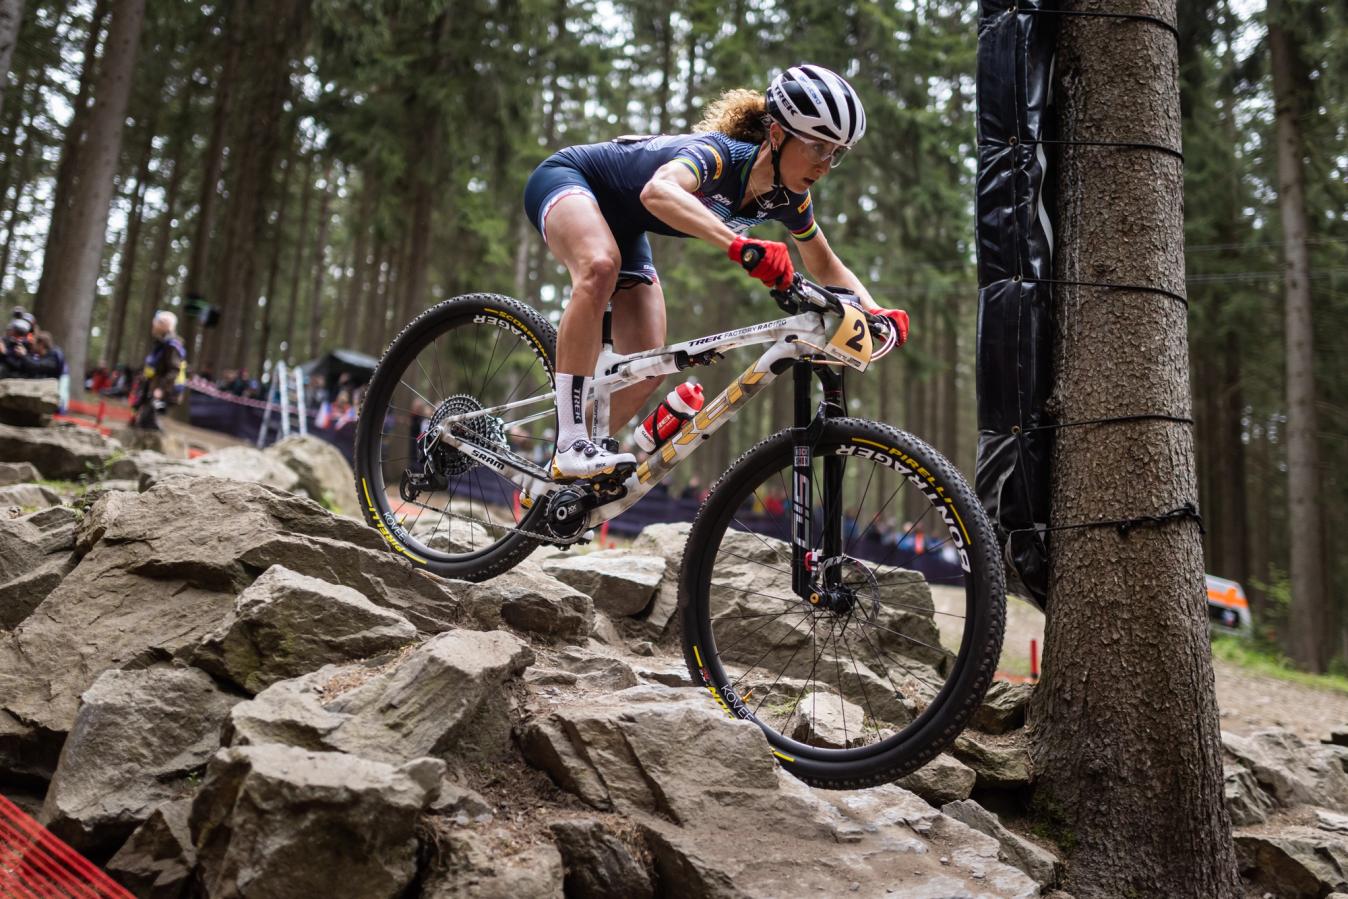 Jolanda Neff is one of the many Swiss riders who will be in action this weekend. 